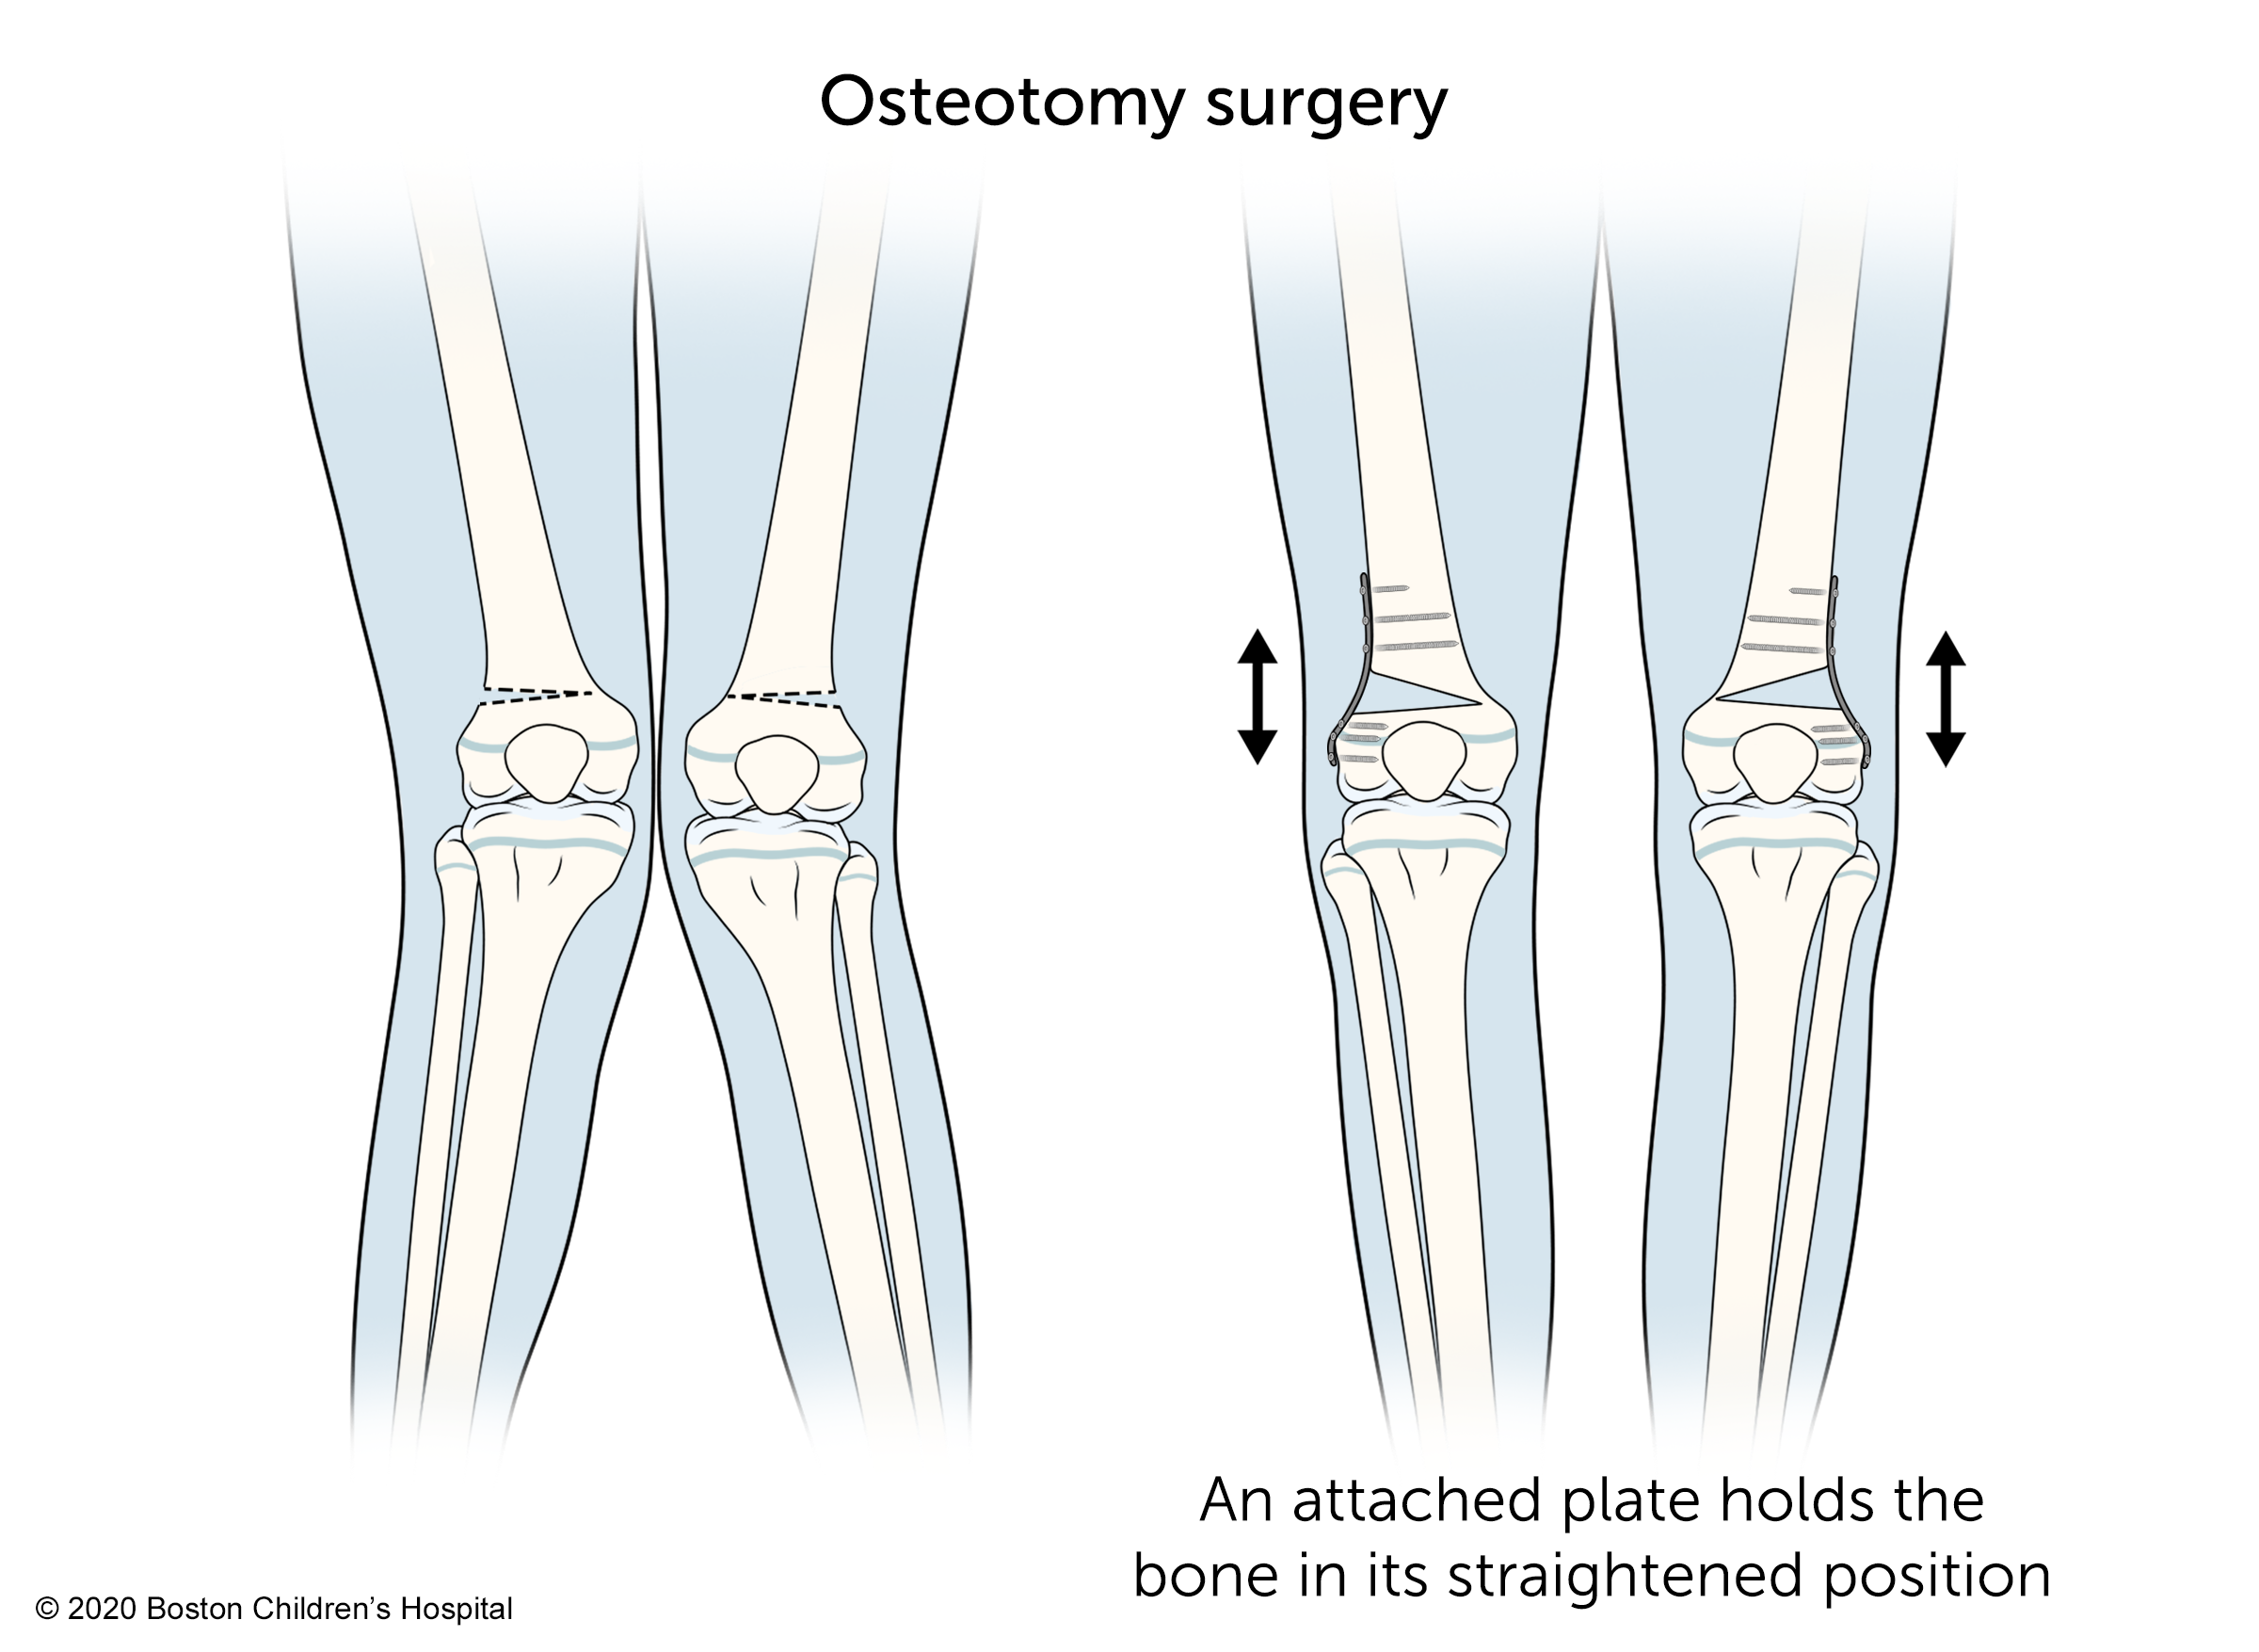 In osteotomy surgery, an attached plate holds the bone in its straightened position.